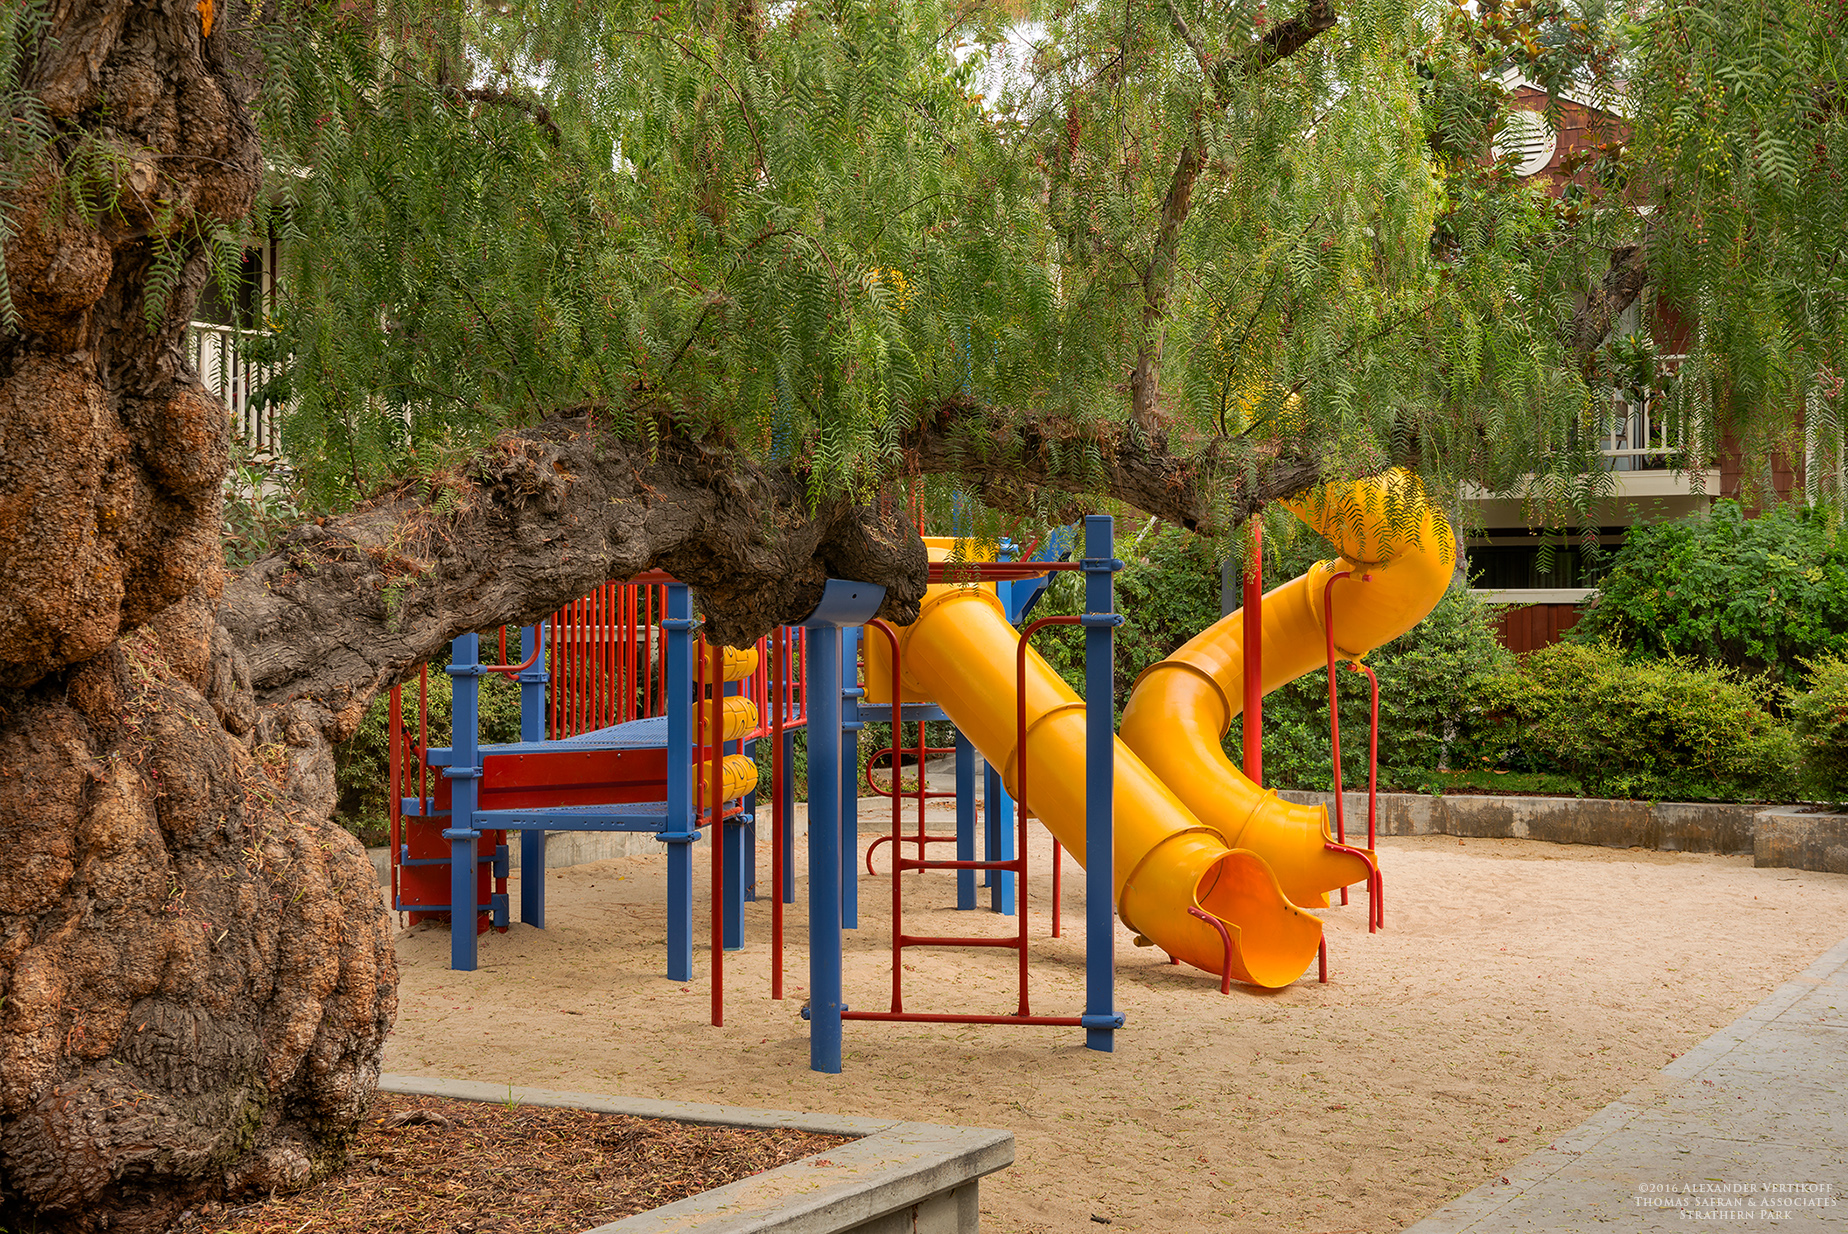 Play area at Strathern Park East. Play area is surrounded
by foliage and a large tree that sets on top of cement raised beds. 
Sand surrounds the colorful jungle gym that has two tube slides.